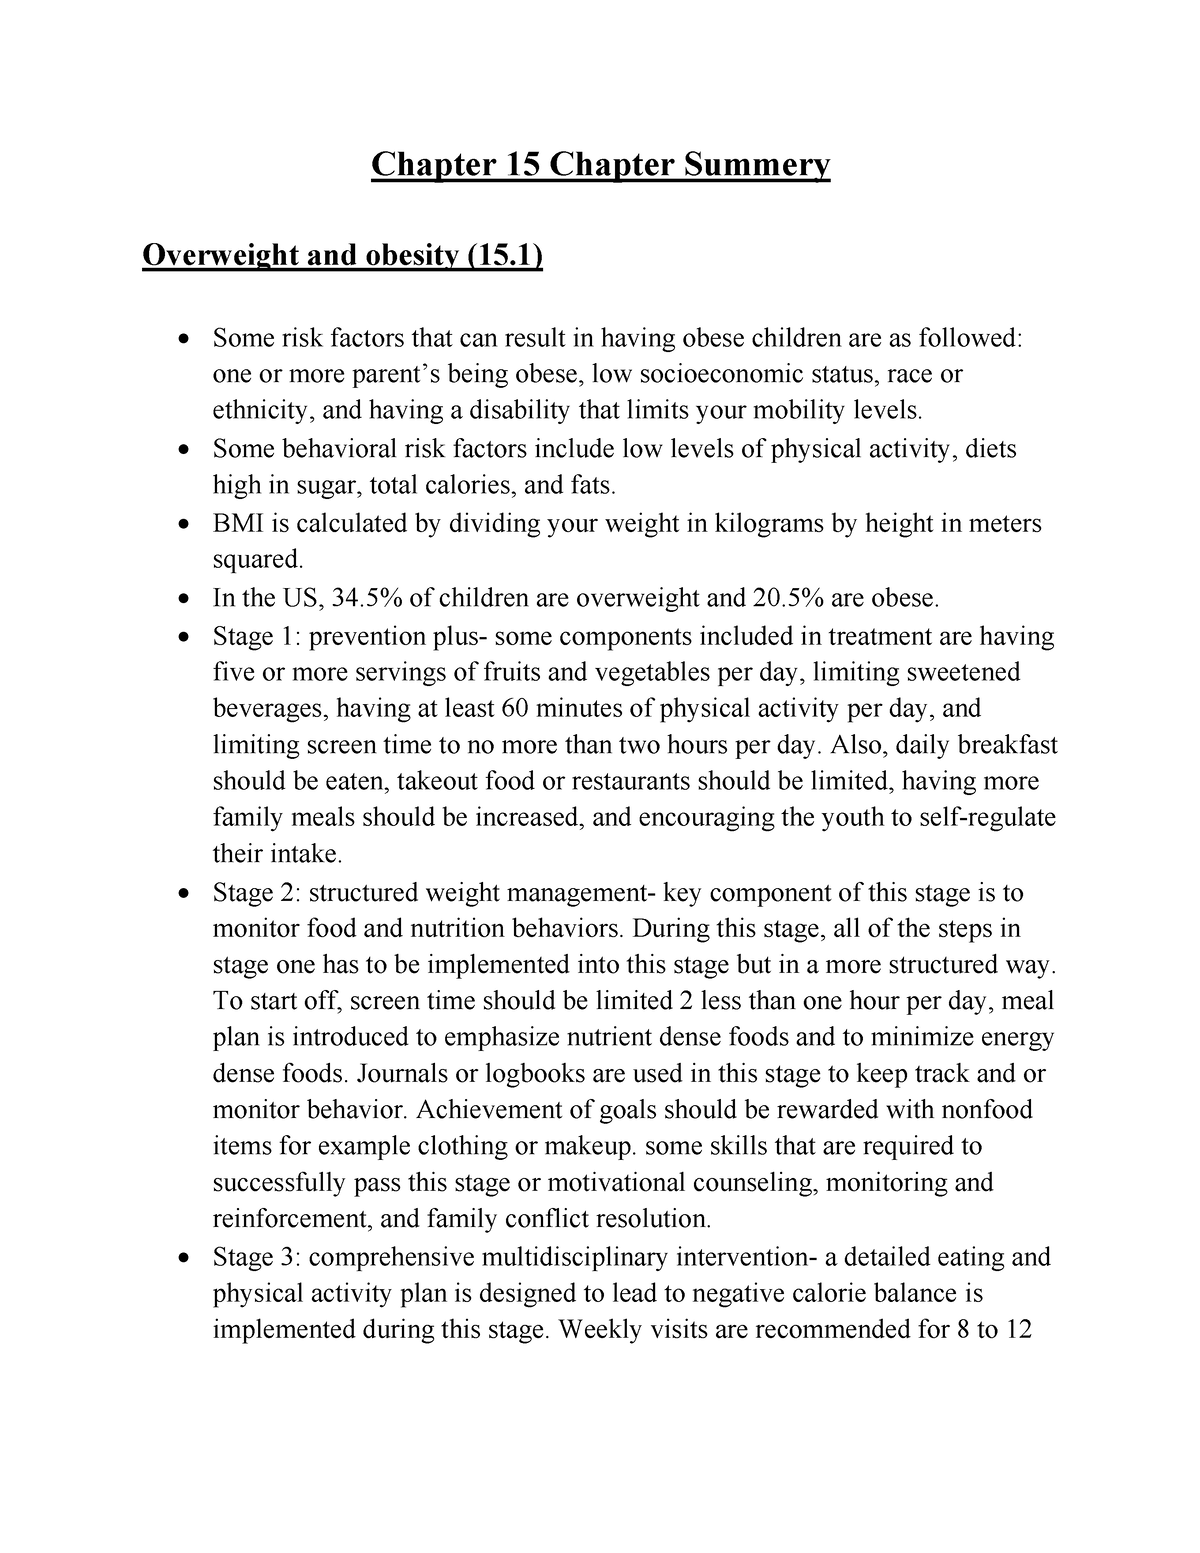 Ch15 NTR4100 - Summary of the whole chapter, main points fro. each ...